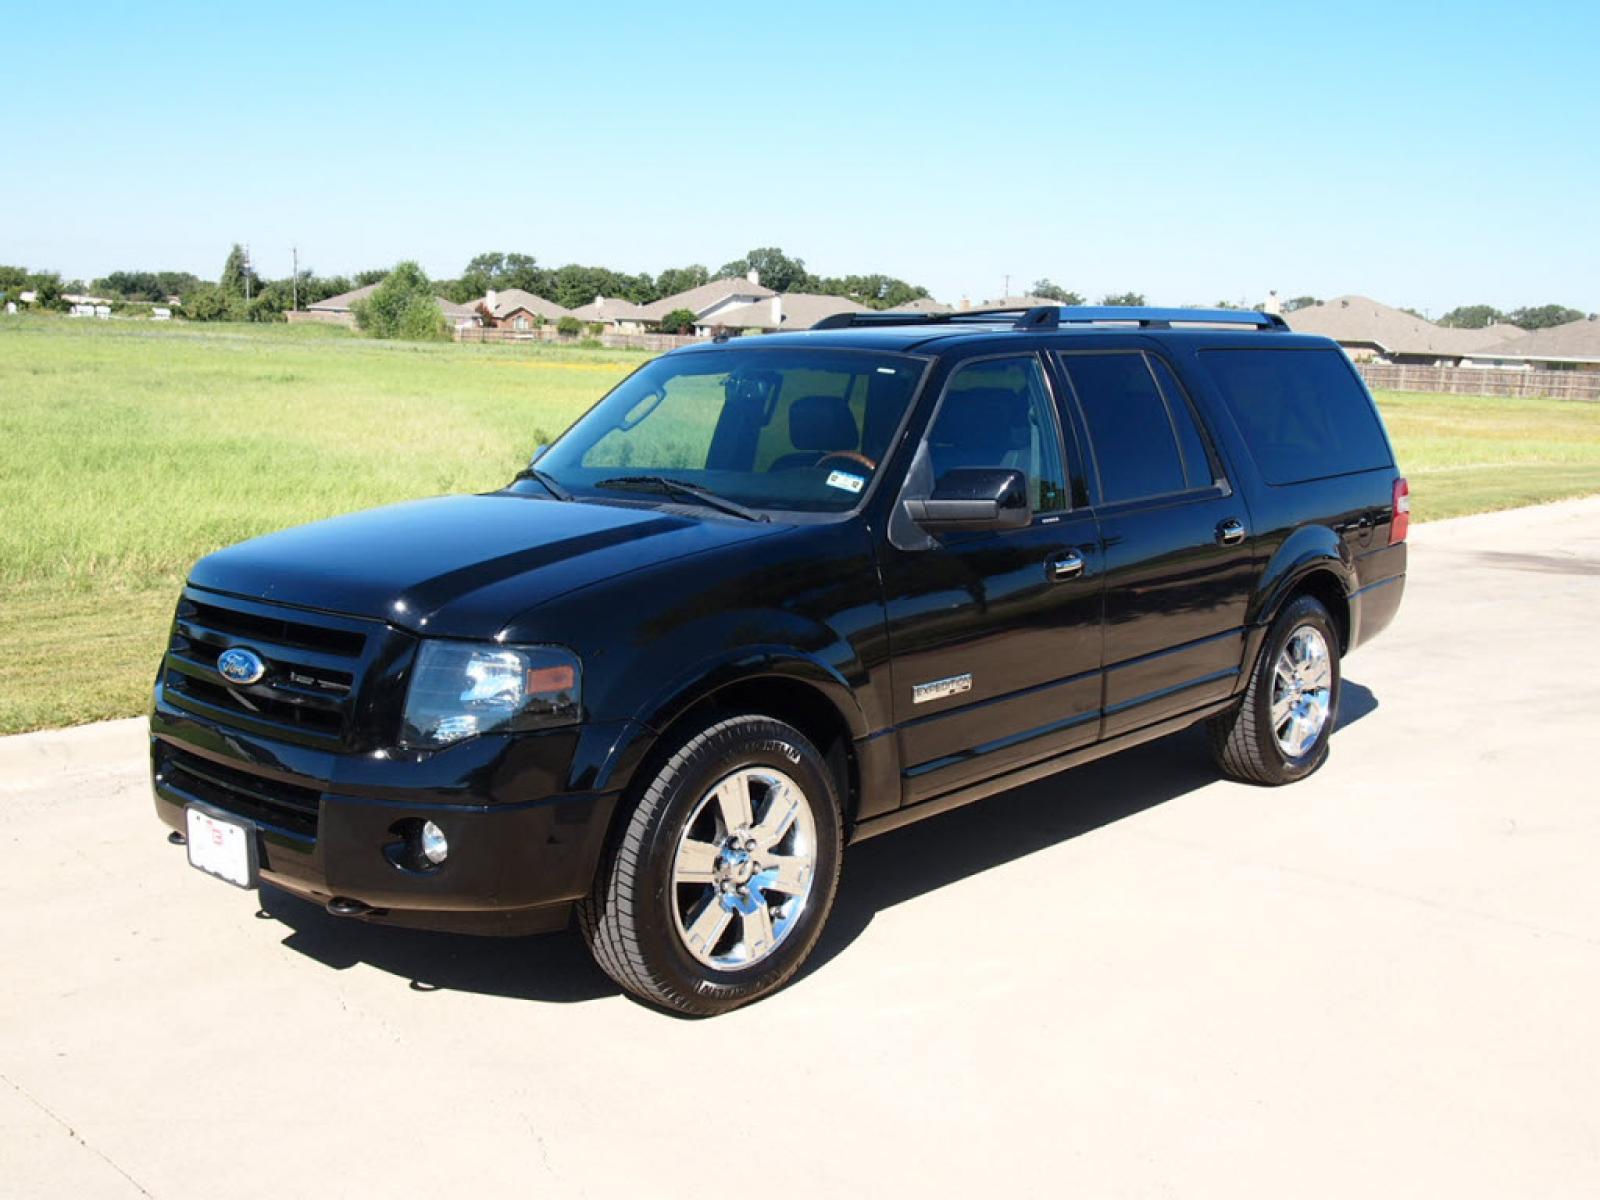 Ford Expedition #6 - size 1600.